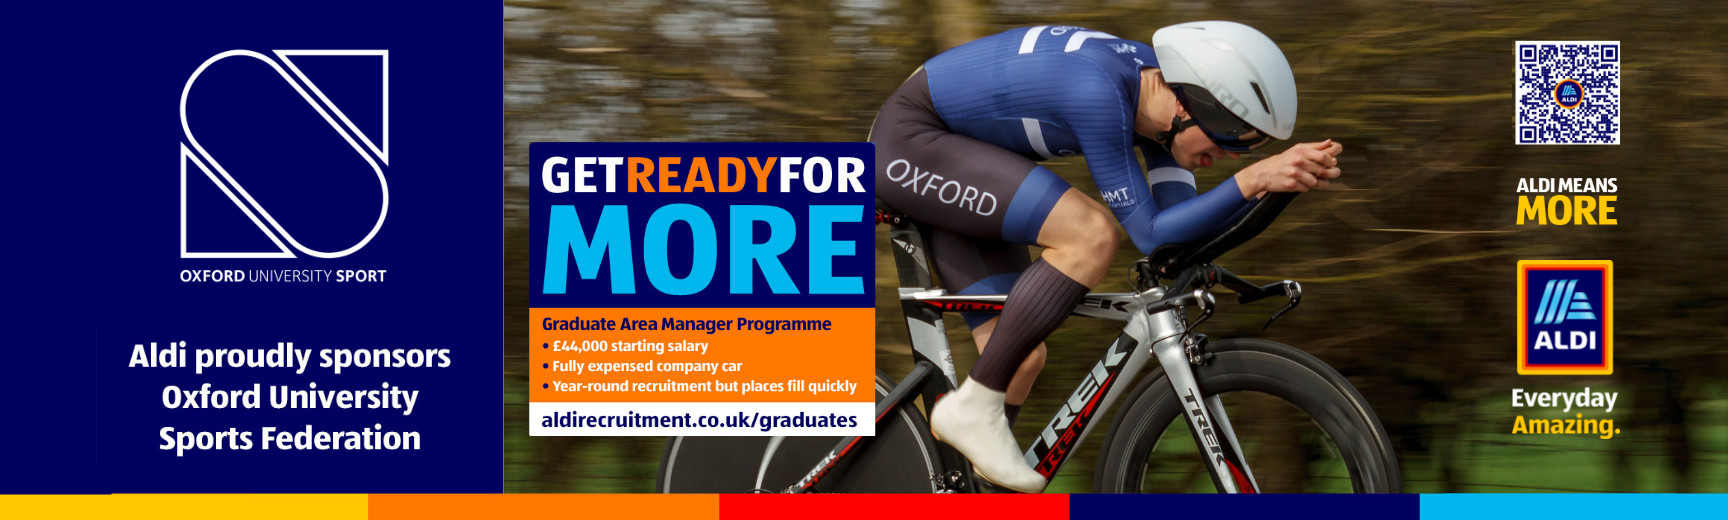 A cycling in Oxford University kit, racing on a road bike, with some graphical information about the Aldi Graduate Area Manager programme. Follow the link for details